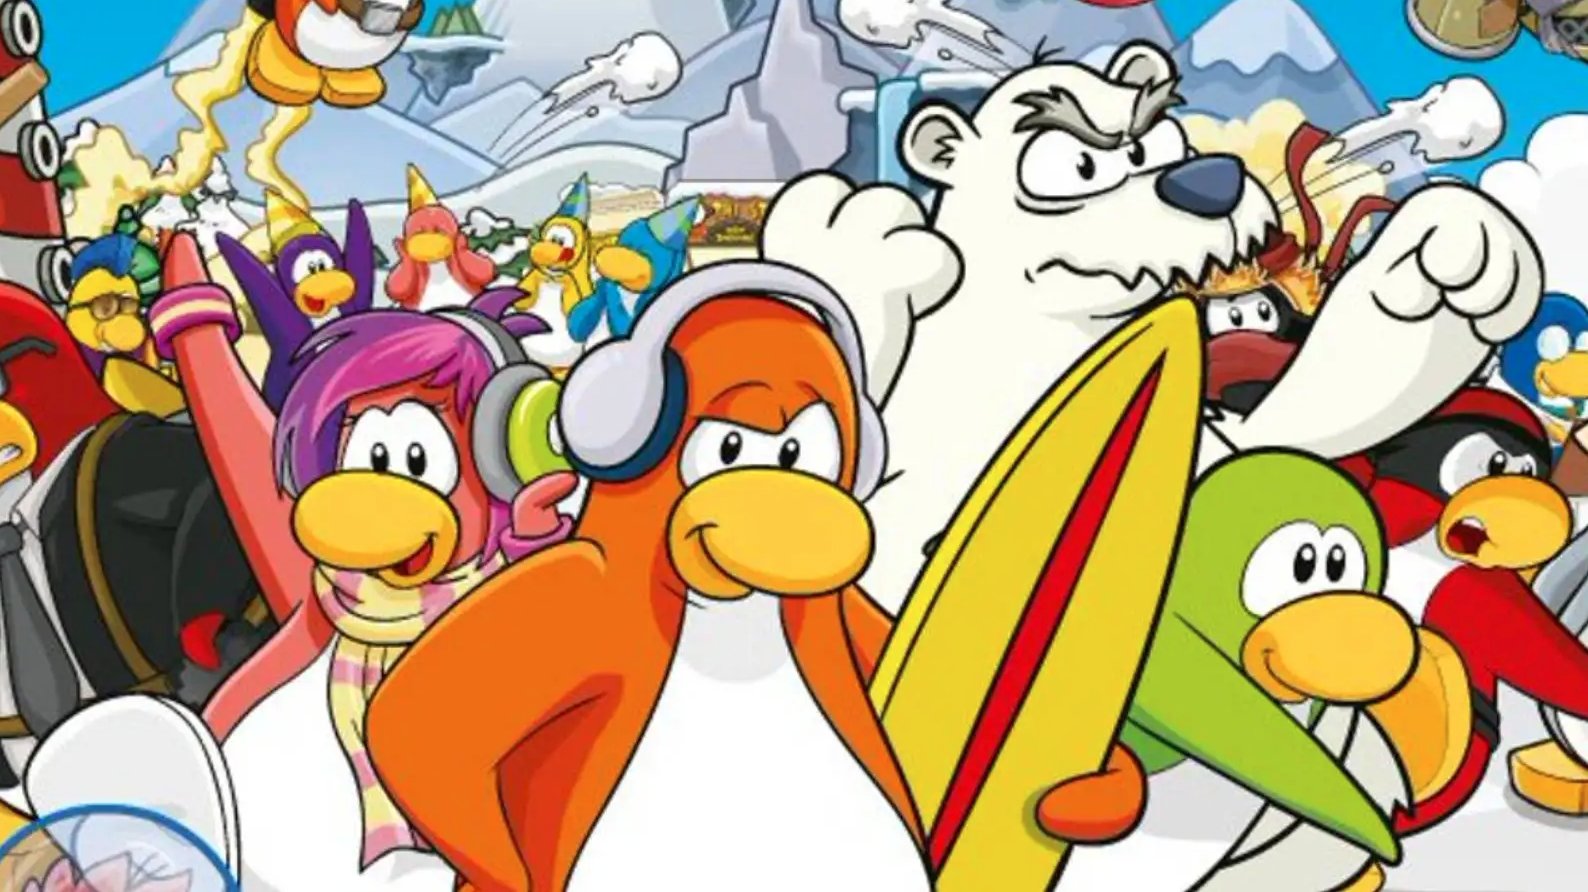 Lance Priebe on The Ethics & Legality of Private Servers – Club Penguin  Mountains